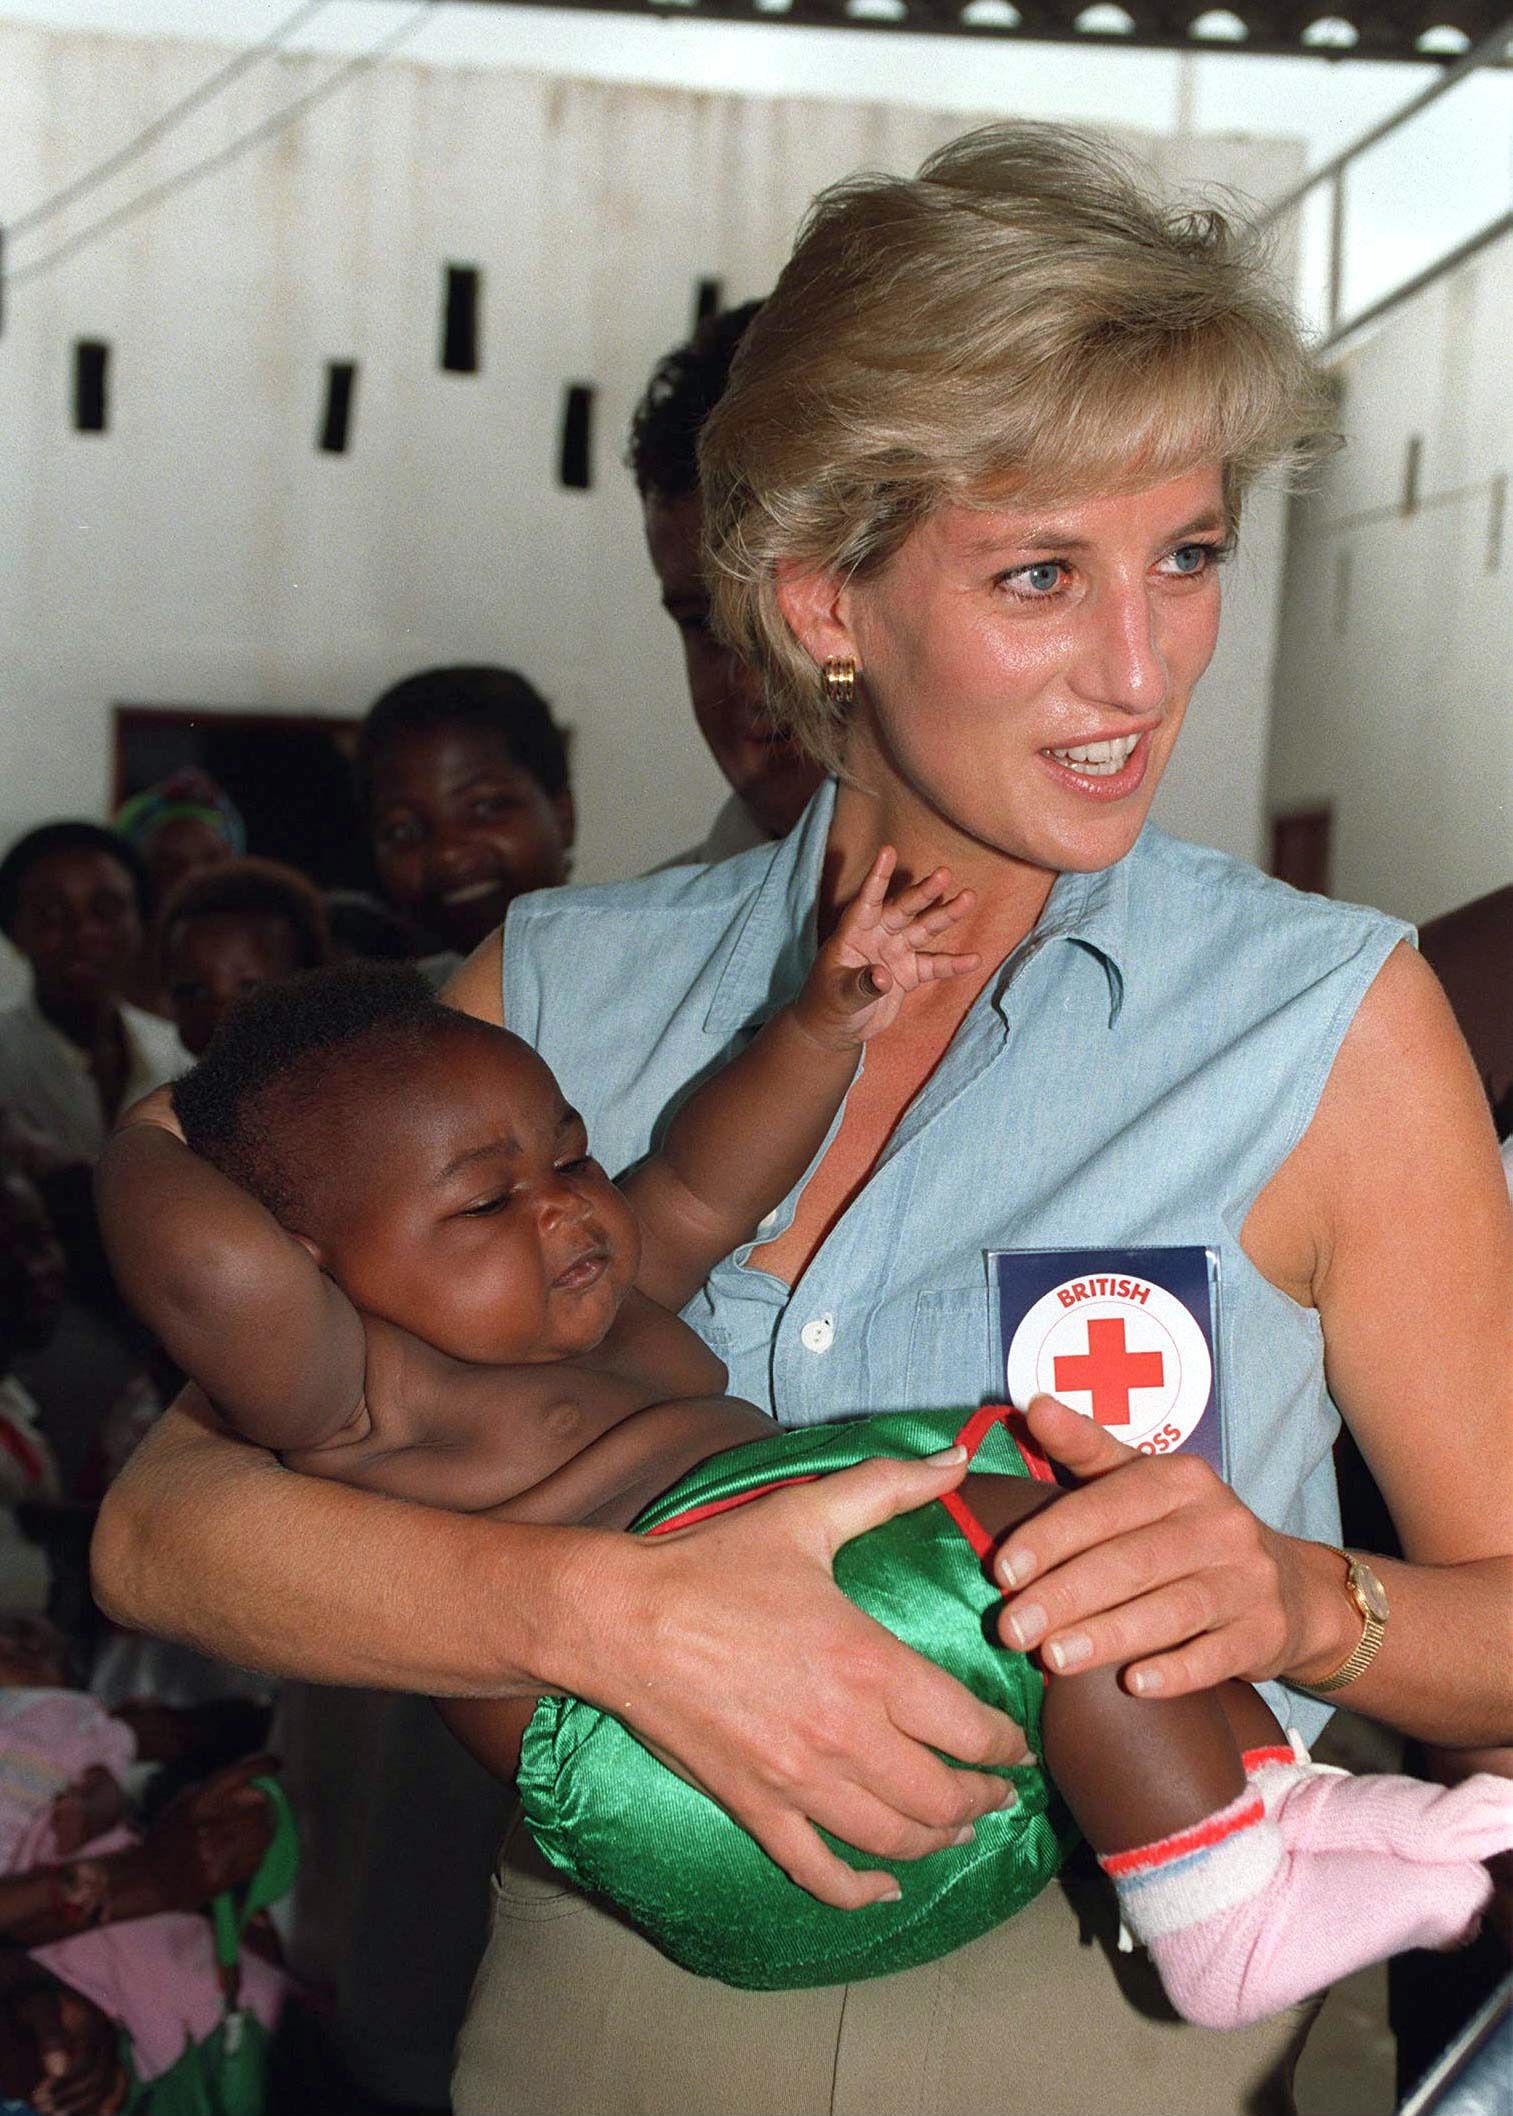 Princess Diana S 1997 Trip To Angola To Advocate Against Landmines In Photos